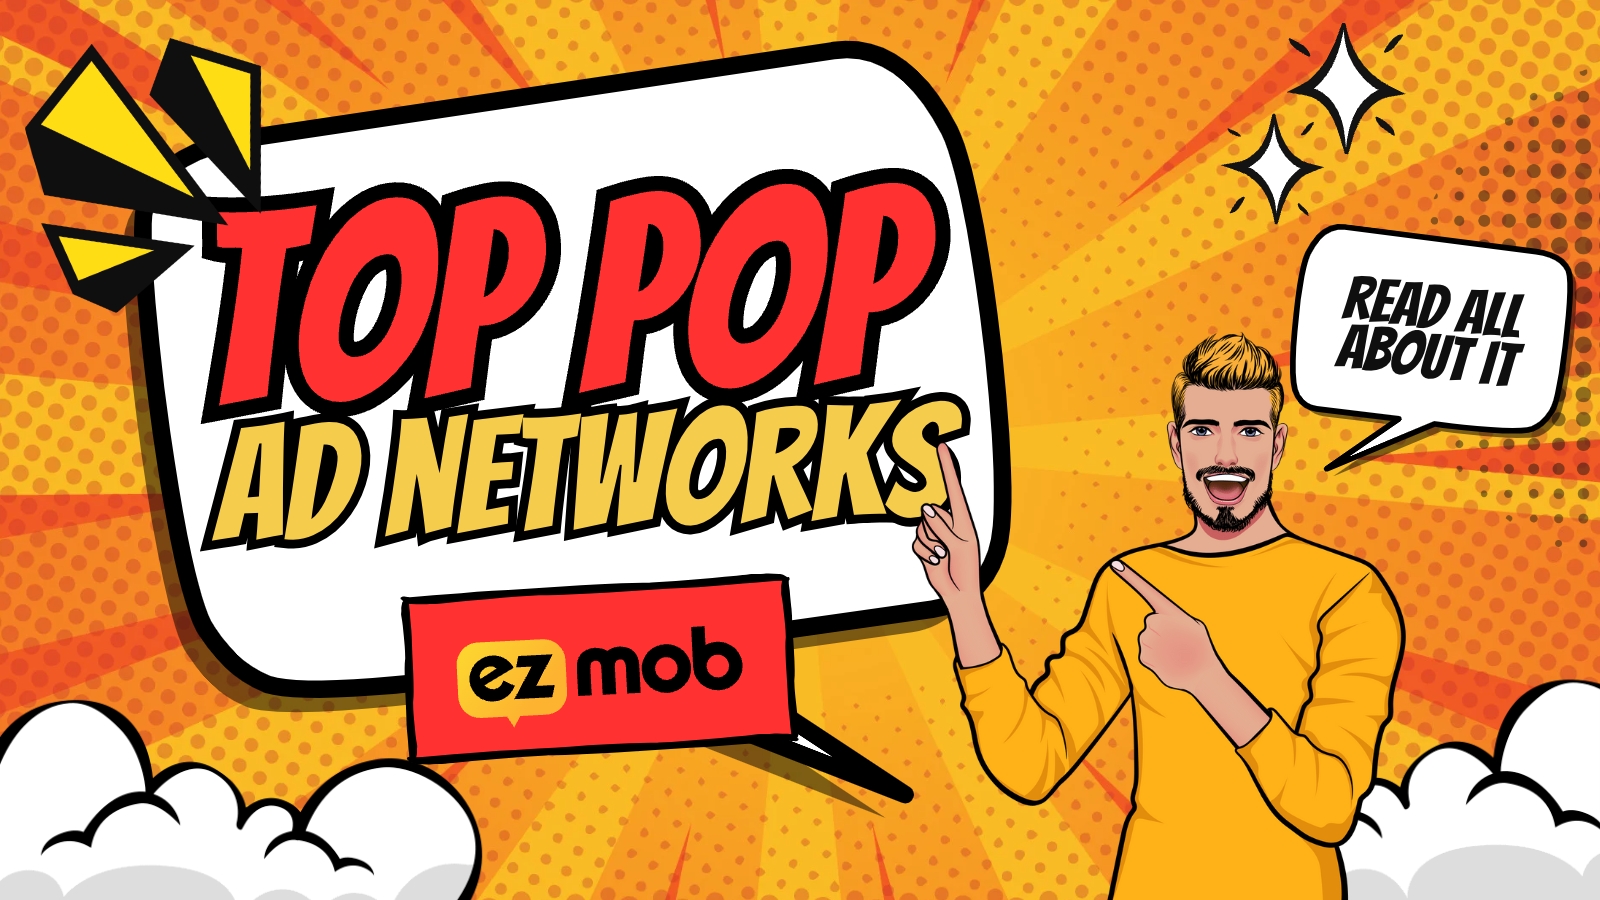 top pop ad networks